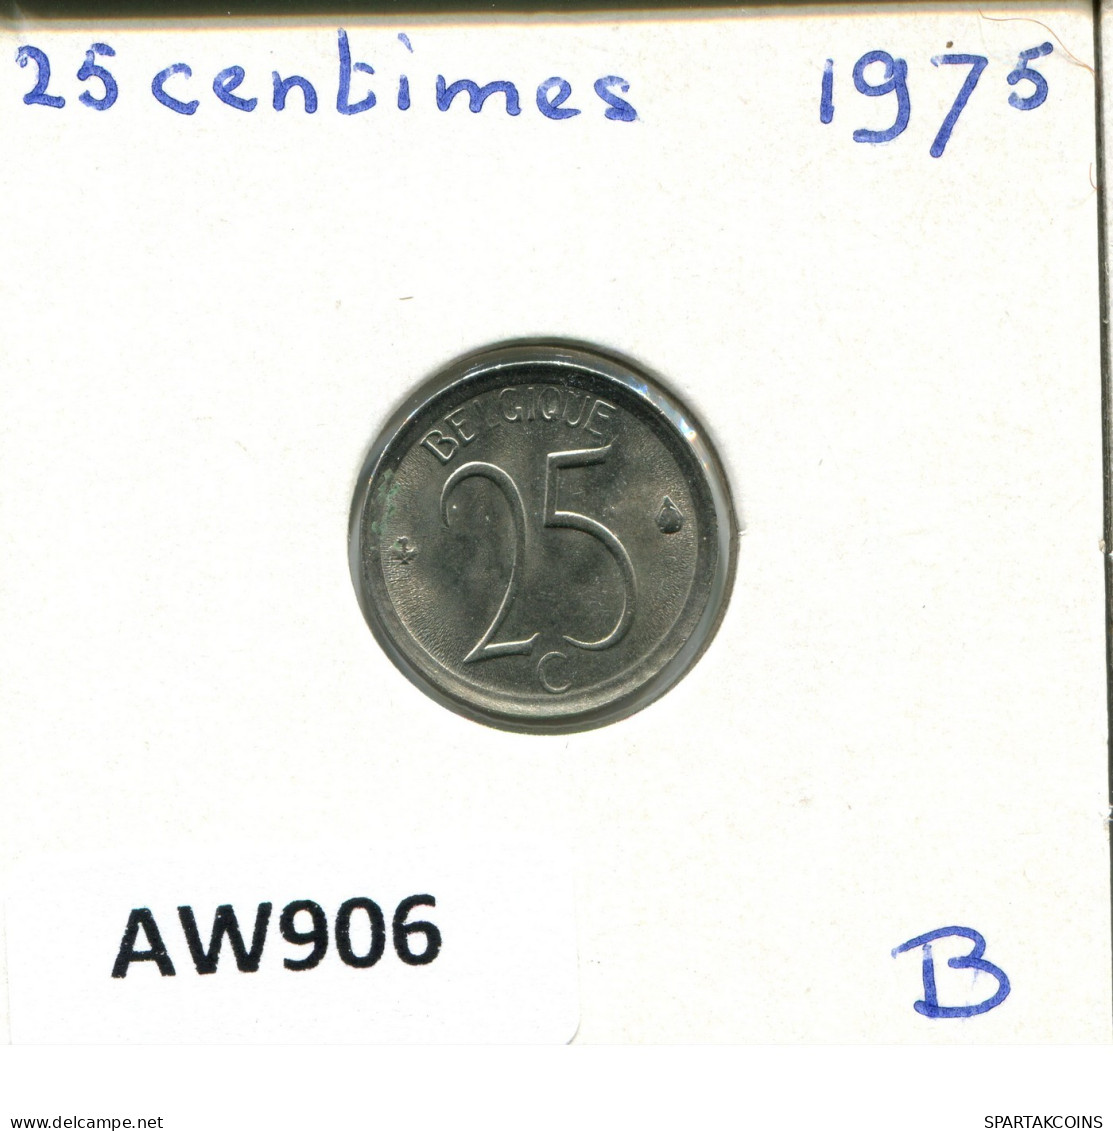 25 CENTIMES 1975 FRENCH Text BELGIUM Coin #AW906.U.A - 25 Centimes